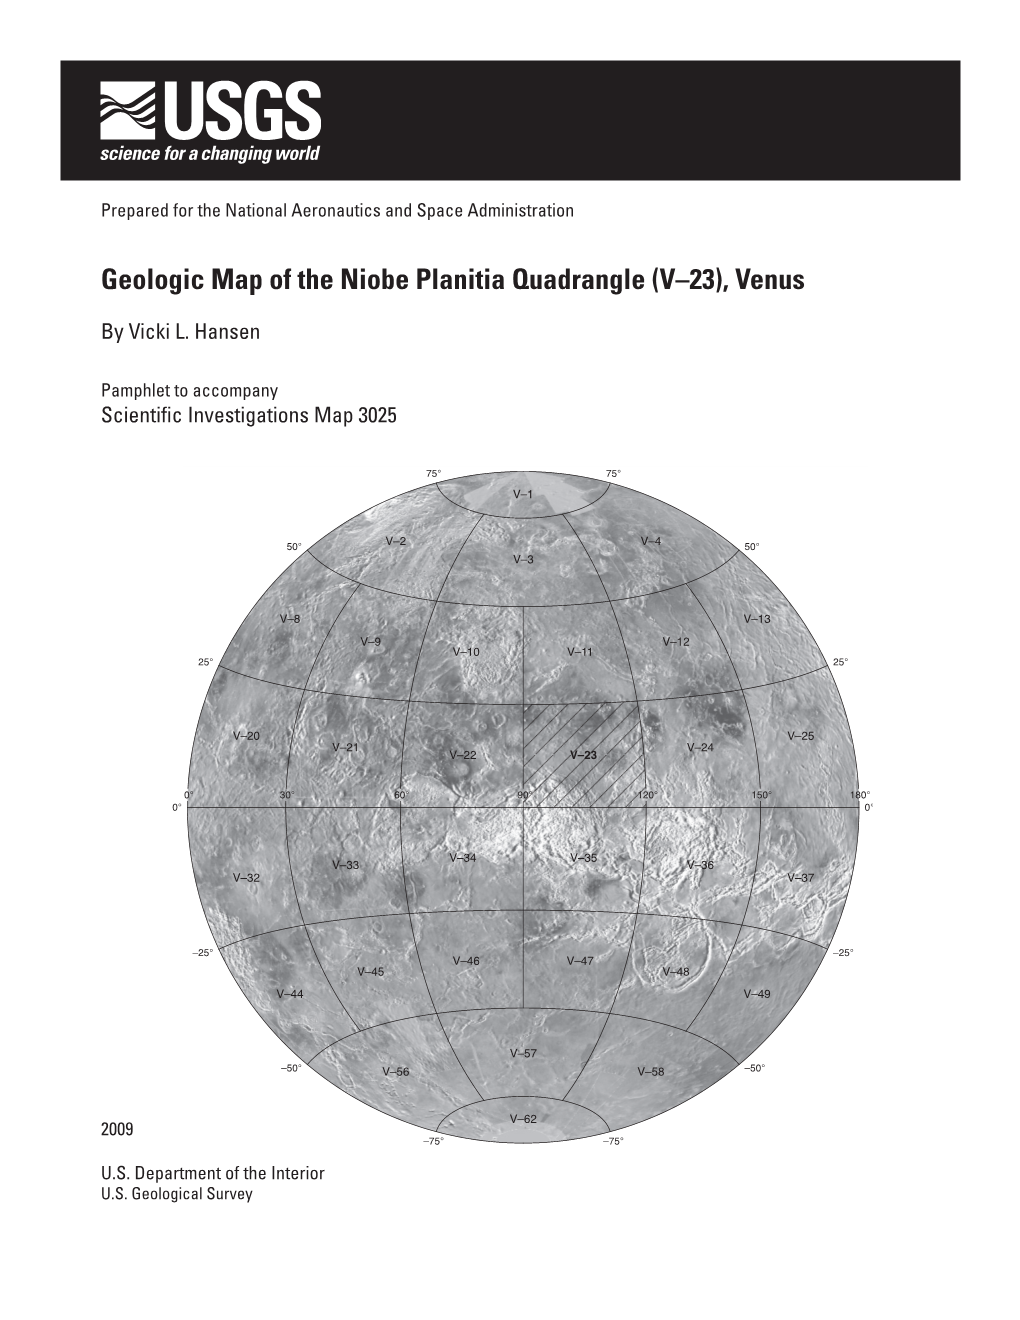 Pamphlet to Accompany Scientific Investigations Map 3025